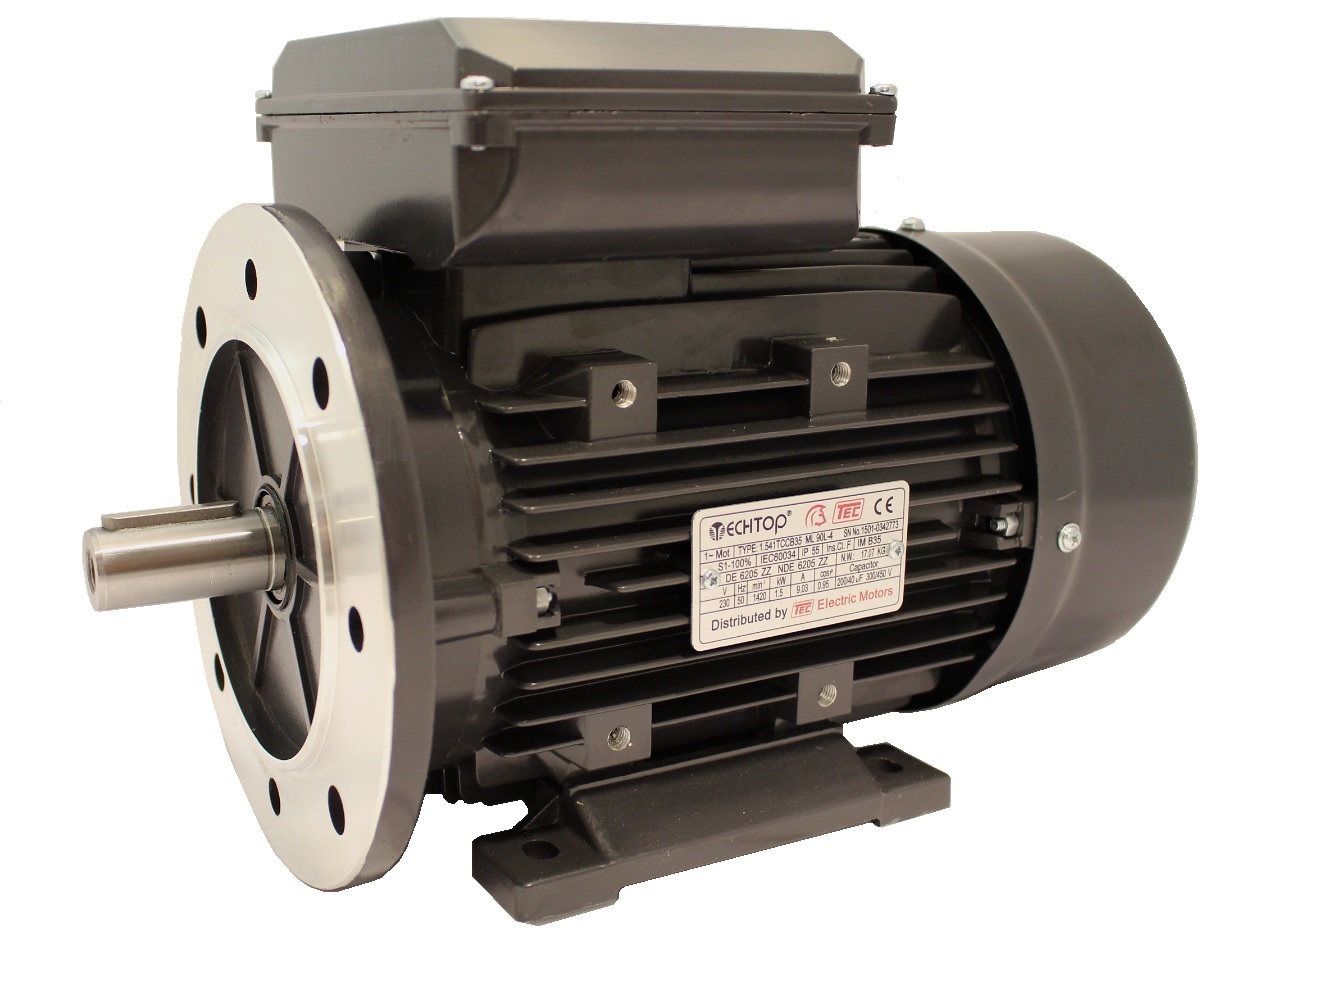 Tec Single Phase 230v Electric Motor 22kw 4 Pole 1500rpm With Flange